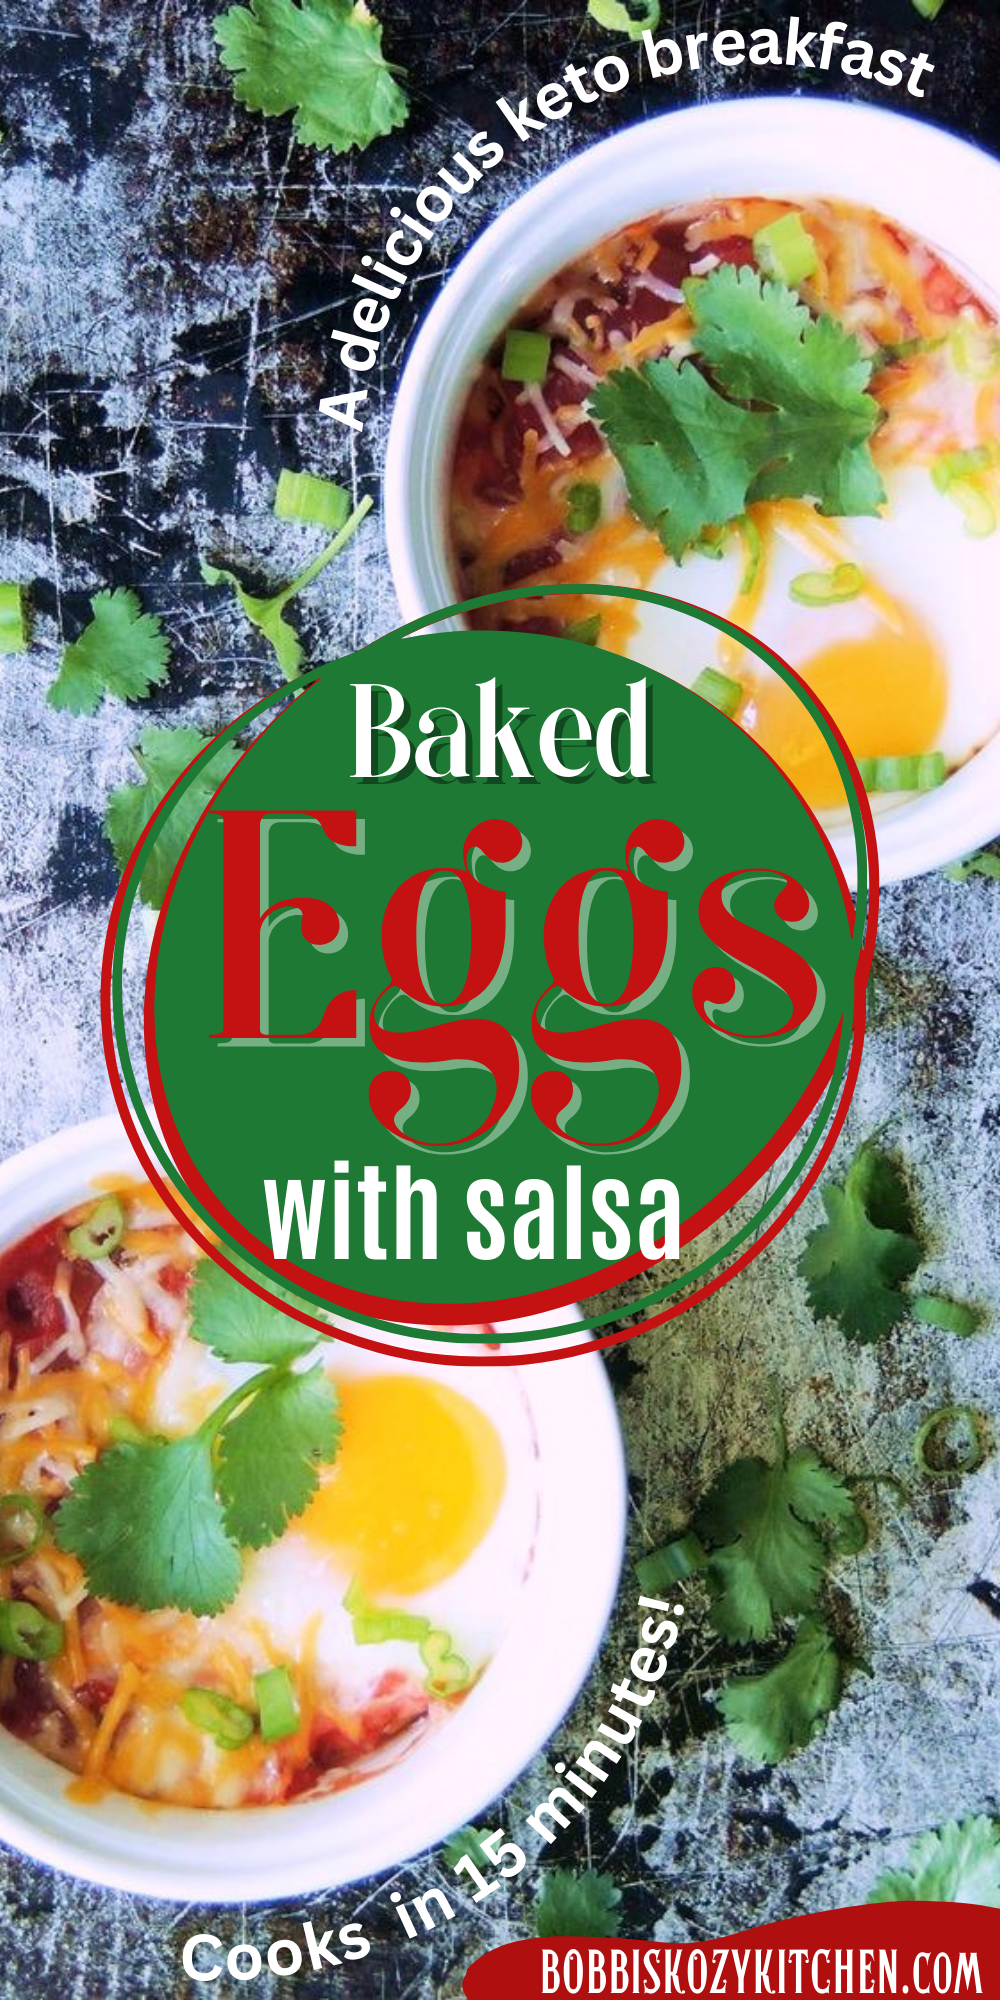 Pinterest graphic with image of baked eggs with salsa on it.